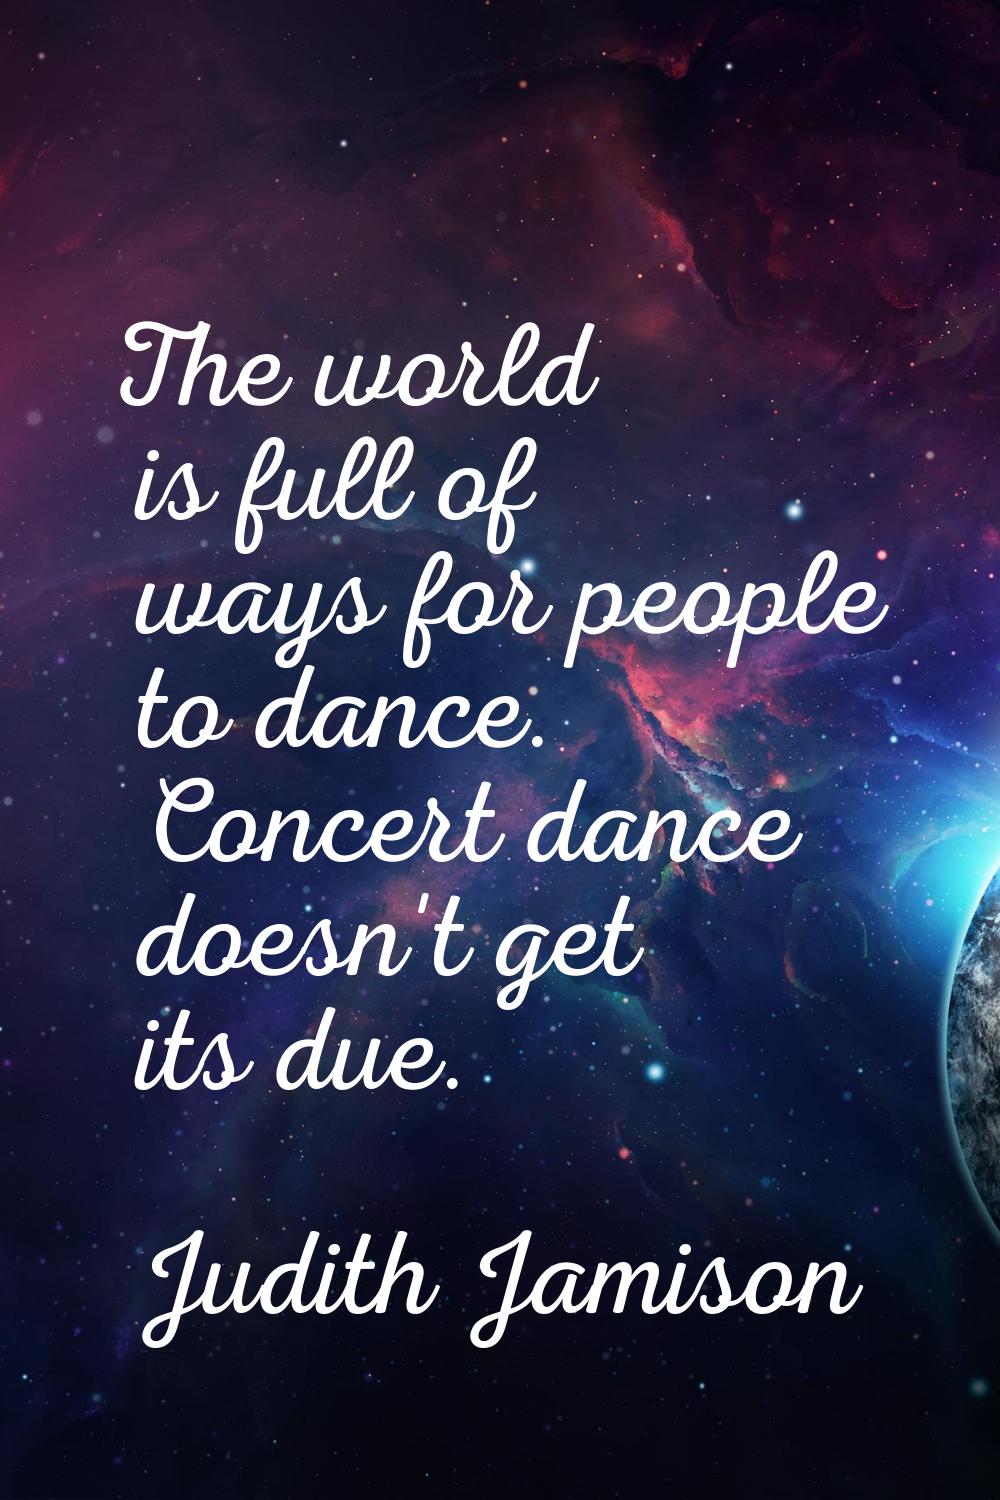 The world is full of ways for people to dance. Concert dance doesn't get its due.